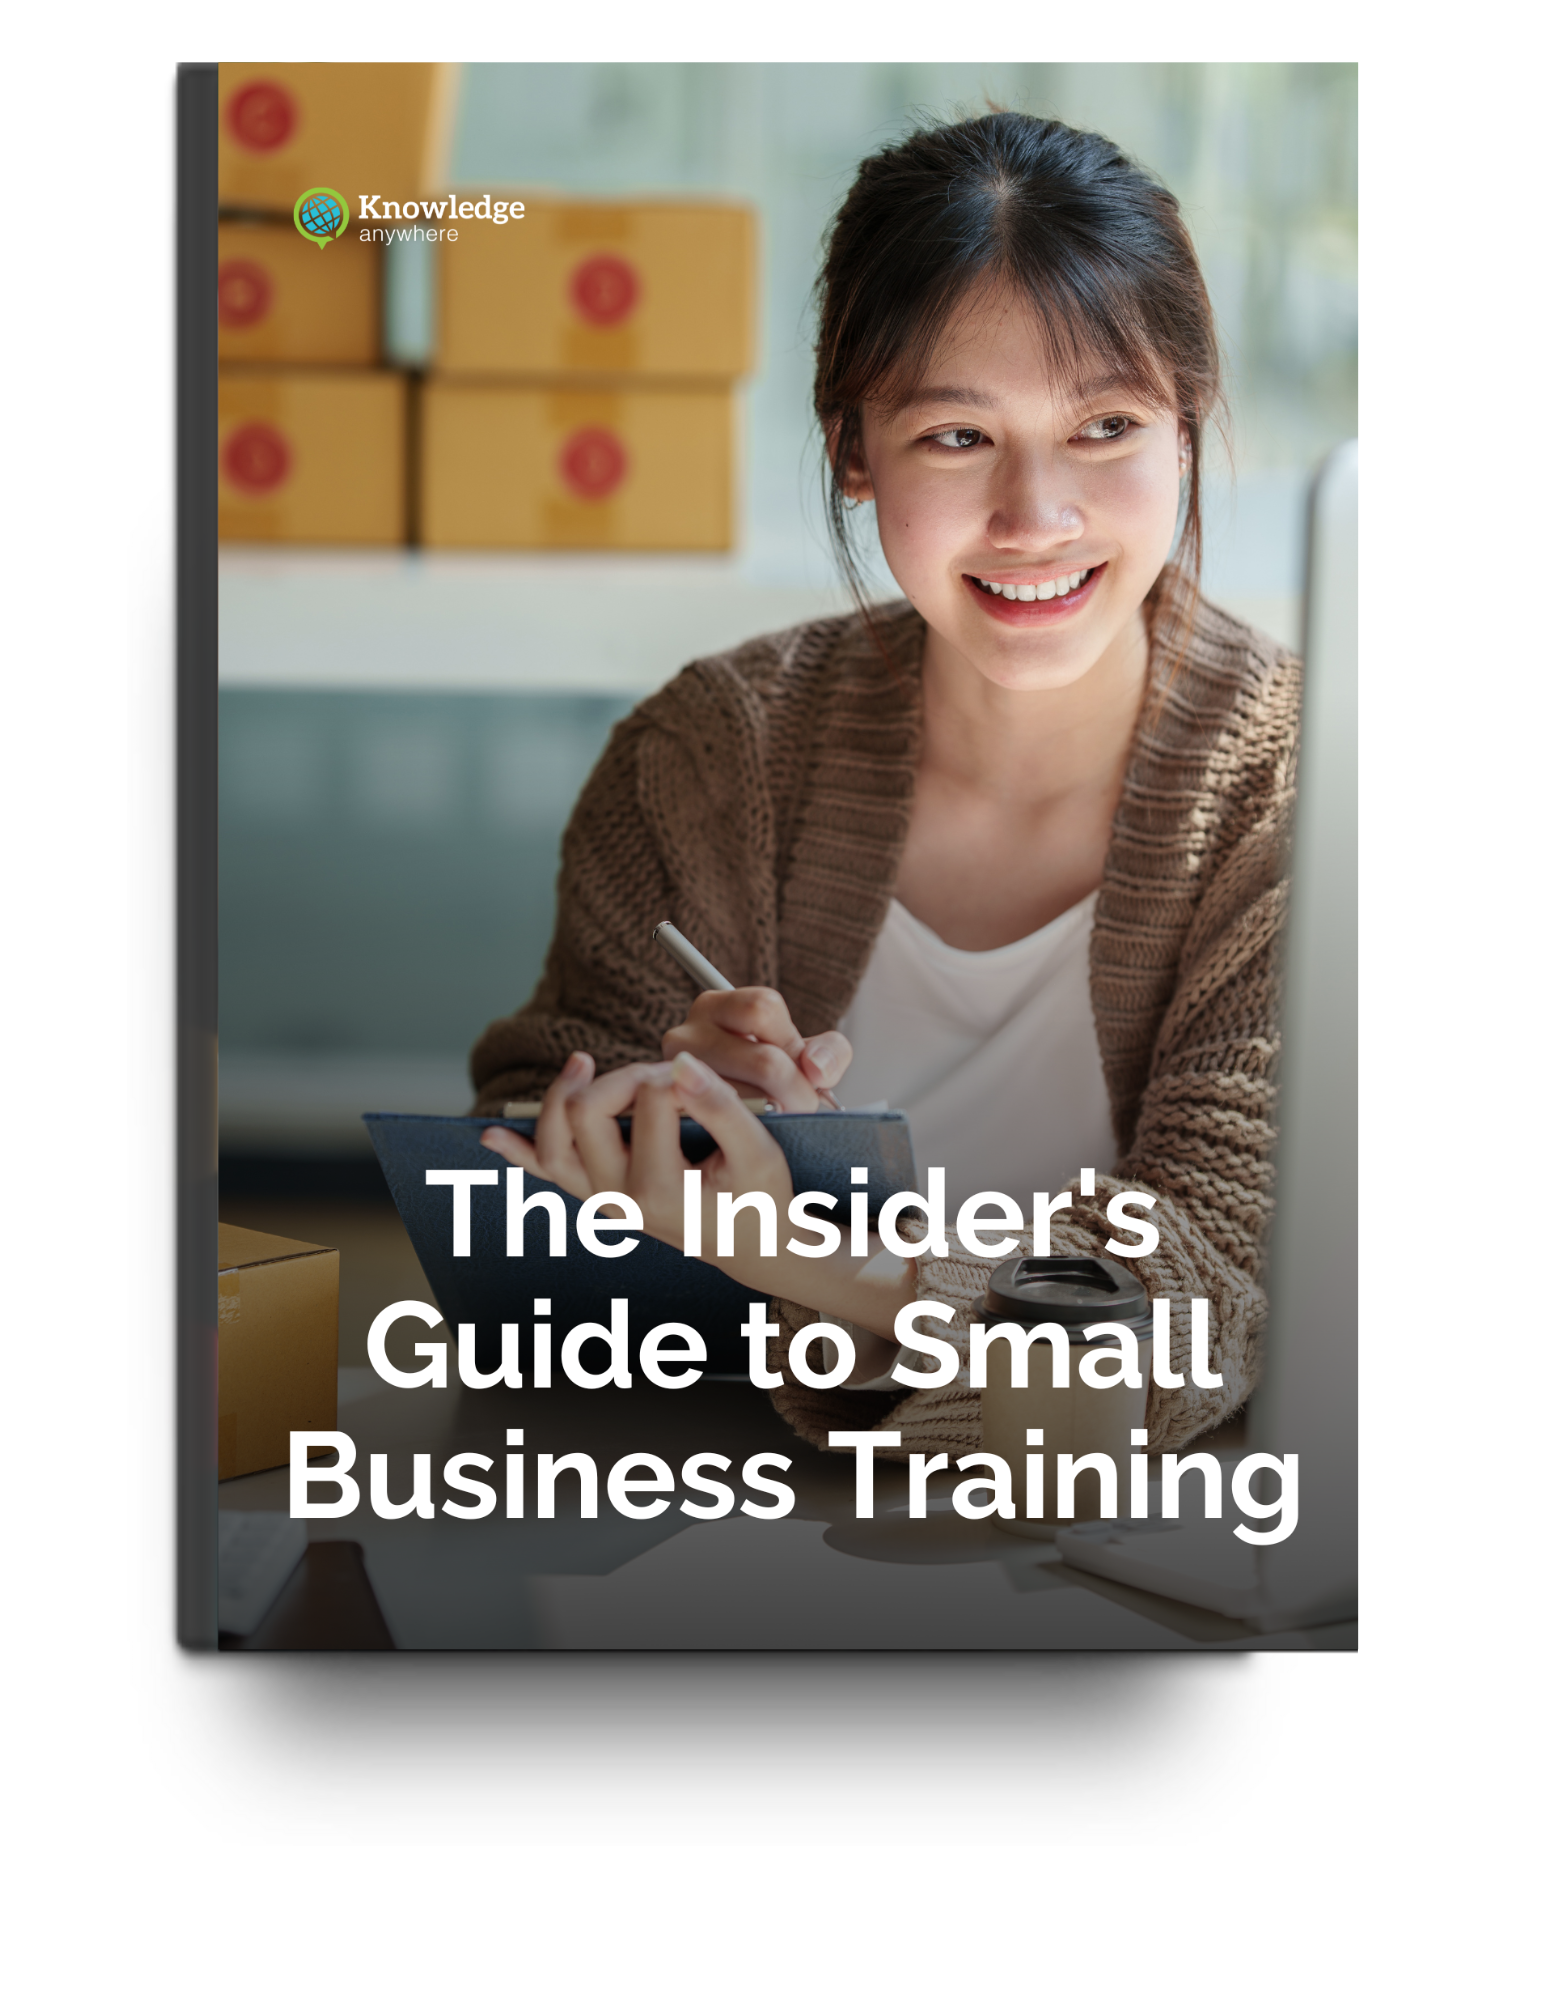  = The Insider’s Guide to Small Business Training =